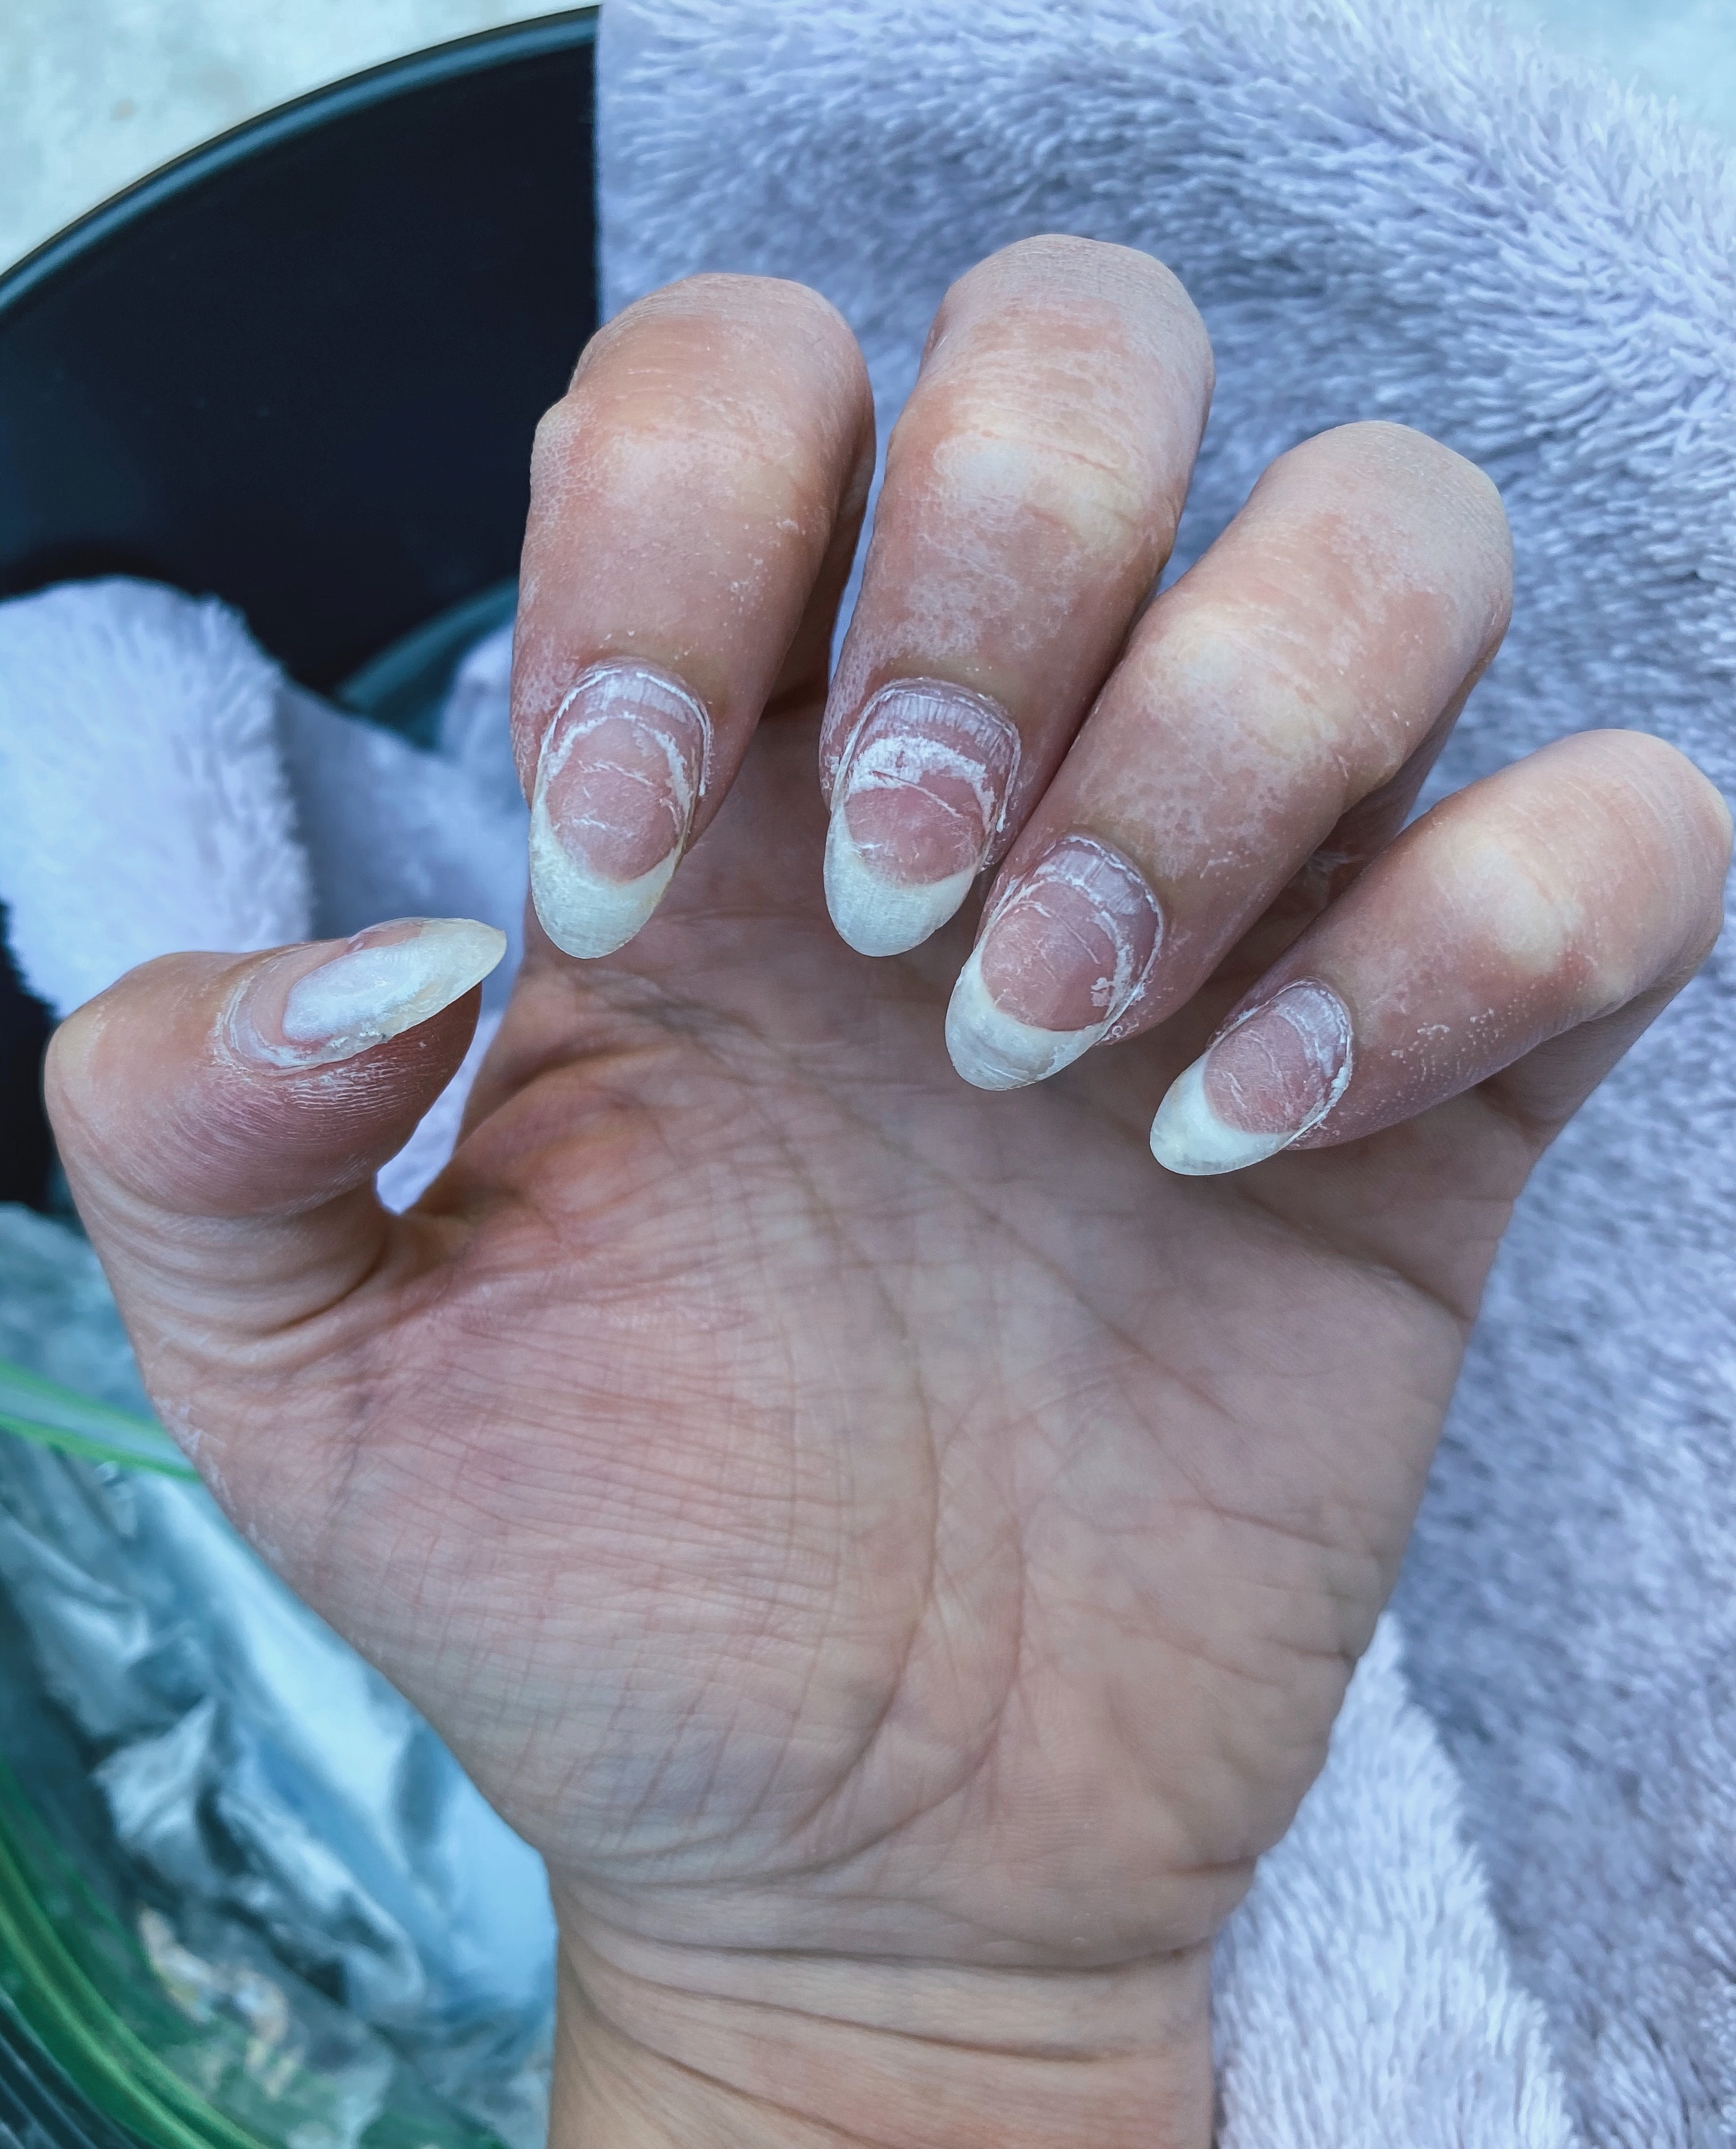 Nails after a soak in 100% acetone, Remove Dip Nails at Home